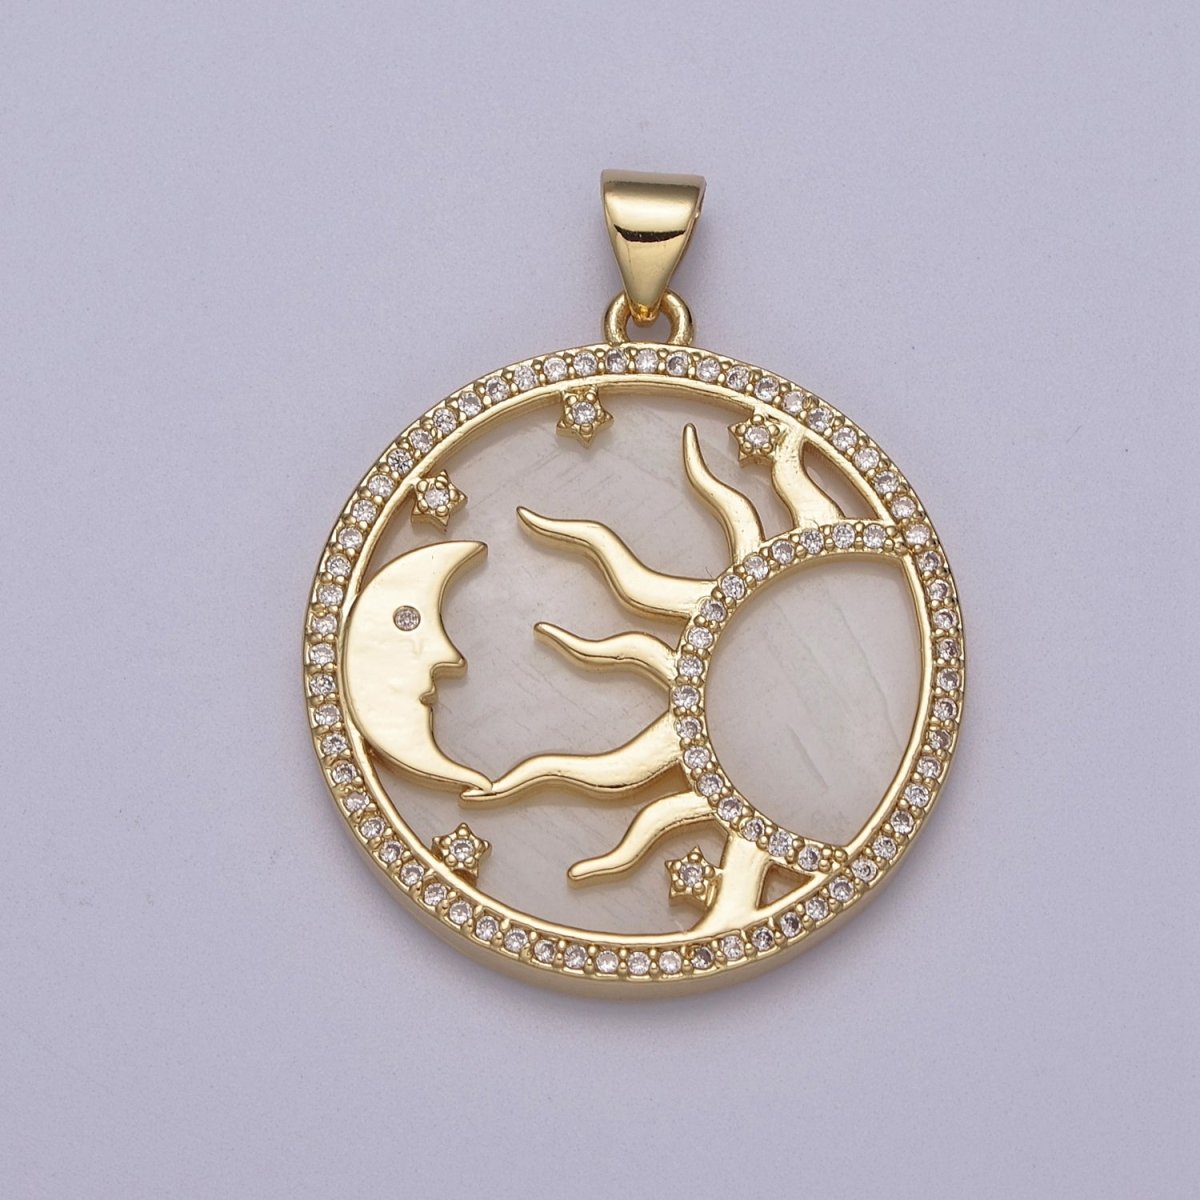 OS Dainty Pearl Gold Good Morning Charm with Cubic Zirconia Star Moon Sun Ray Pendant J-420 - DLUXCA